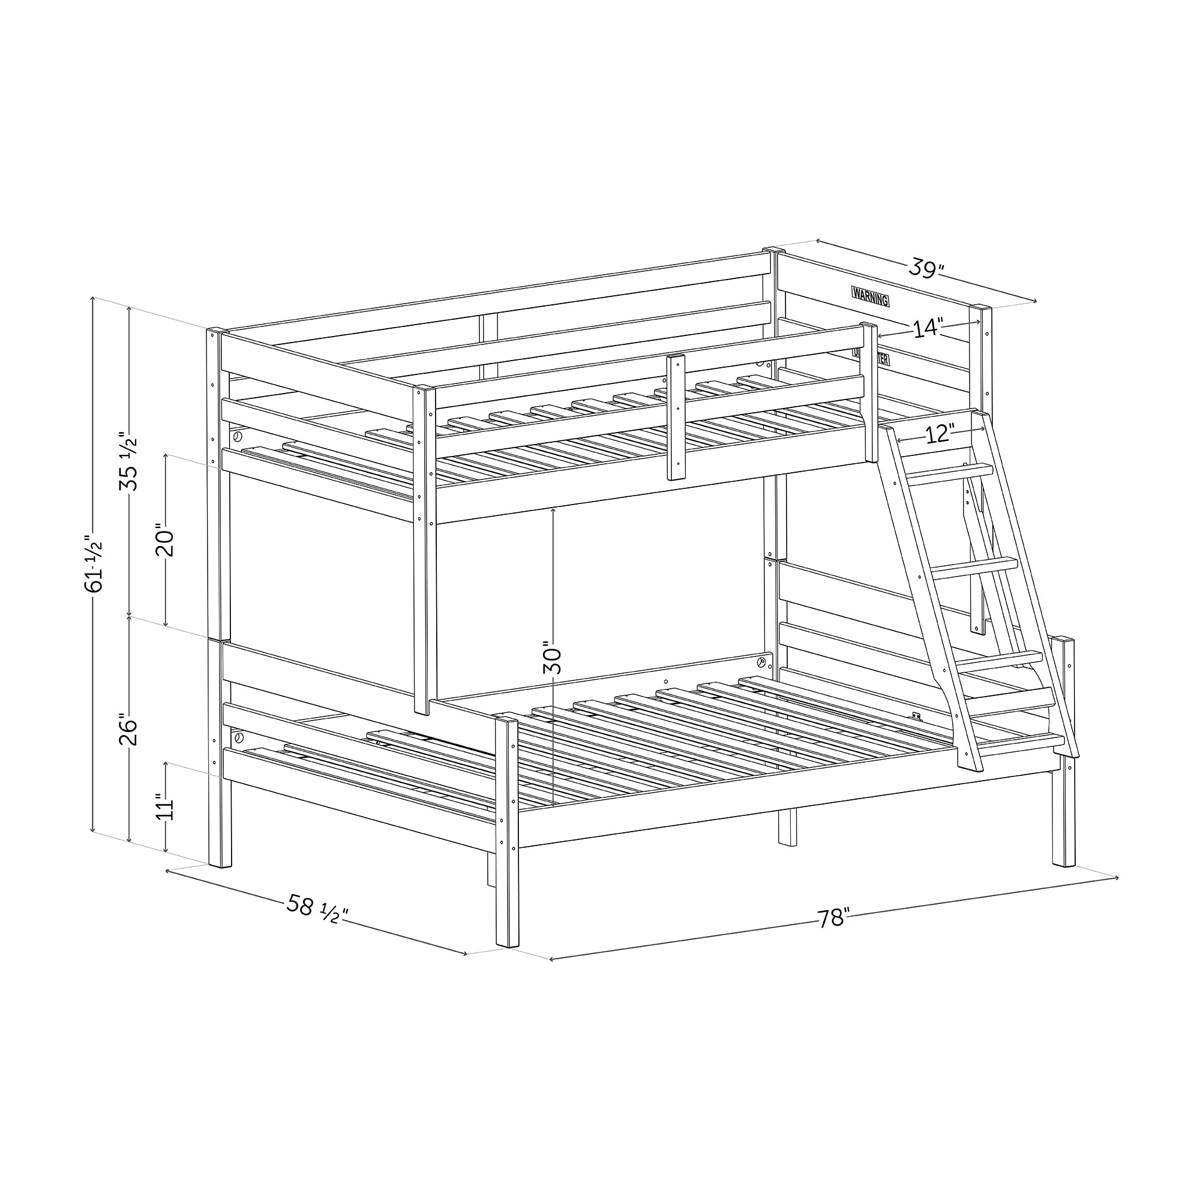 South Shore Fakto Matte Black Twin On Full Wood Bunk Bed